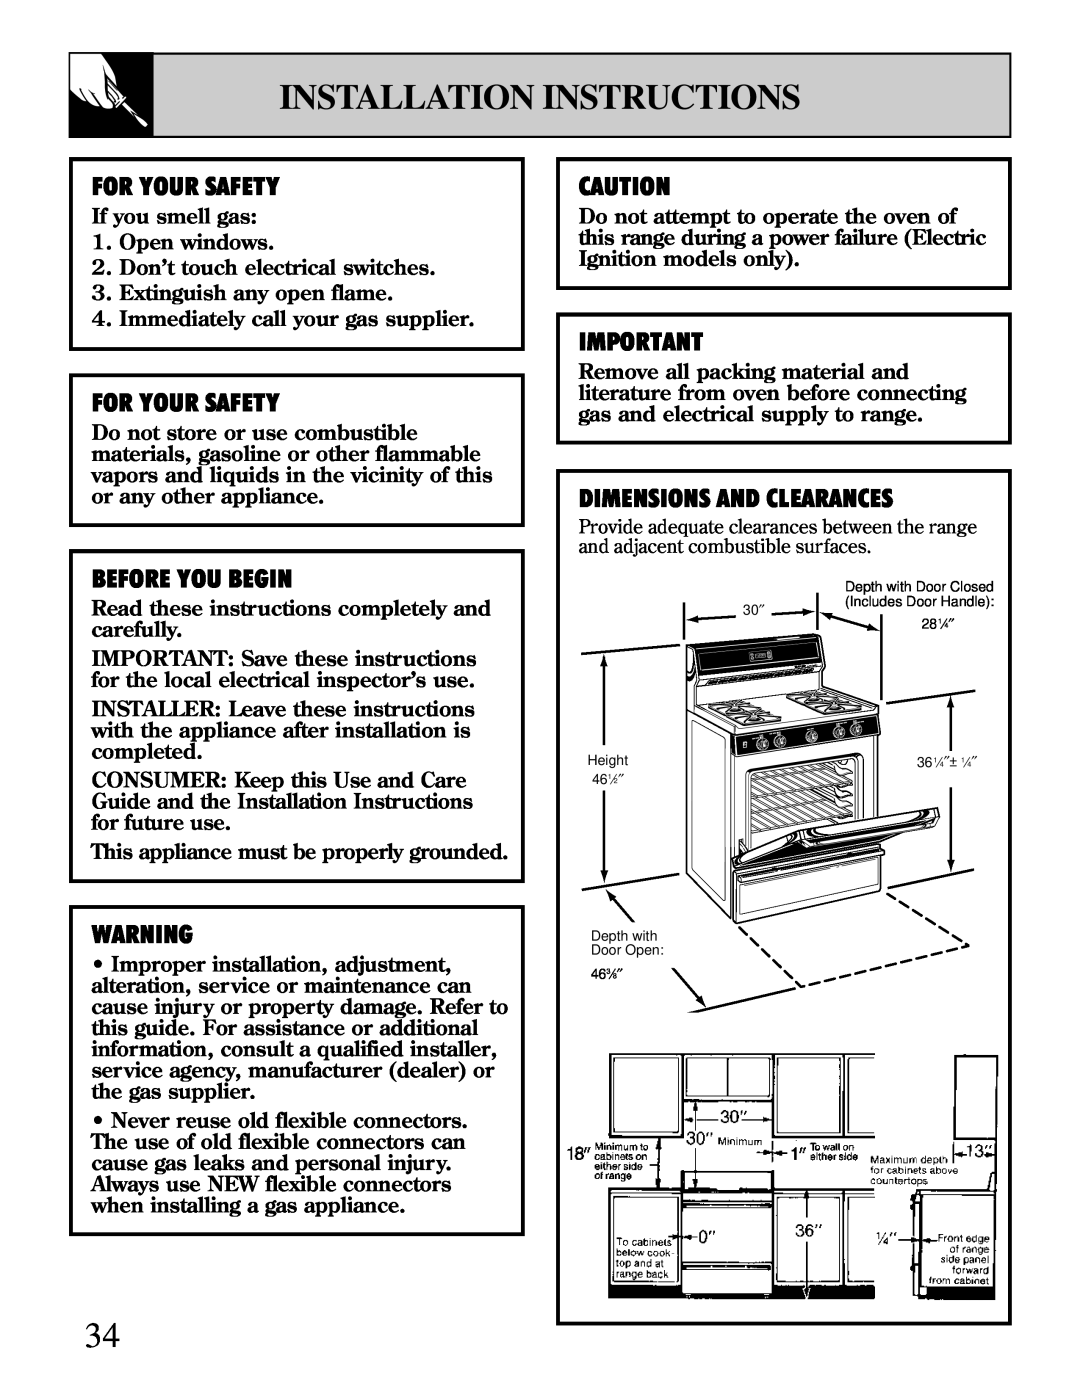 Hotpoint RGB744 Installation Instructions, For Your Safety, Before You Begin, Dimensions And Clearances 